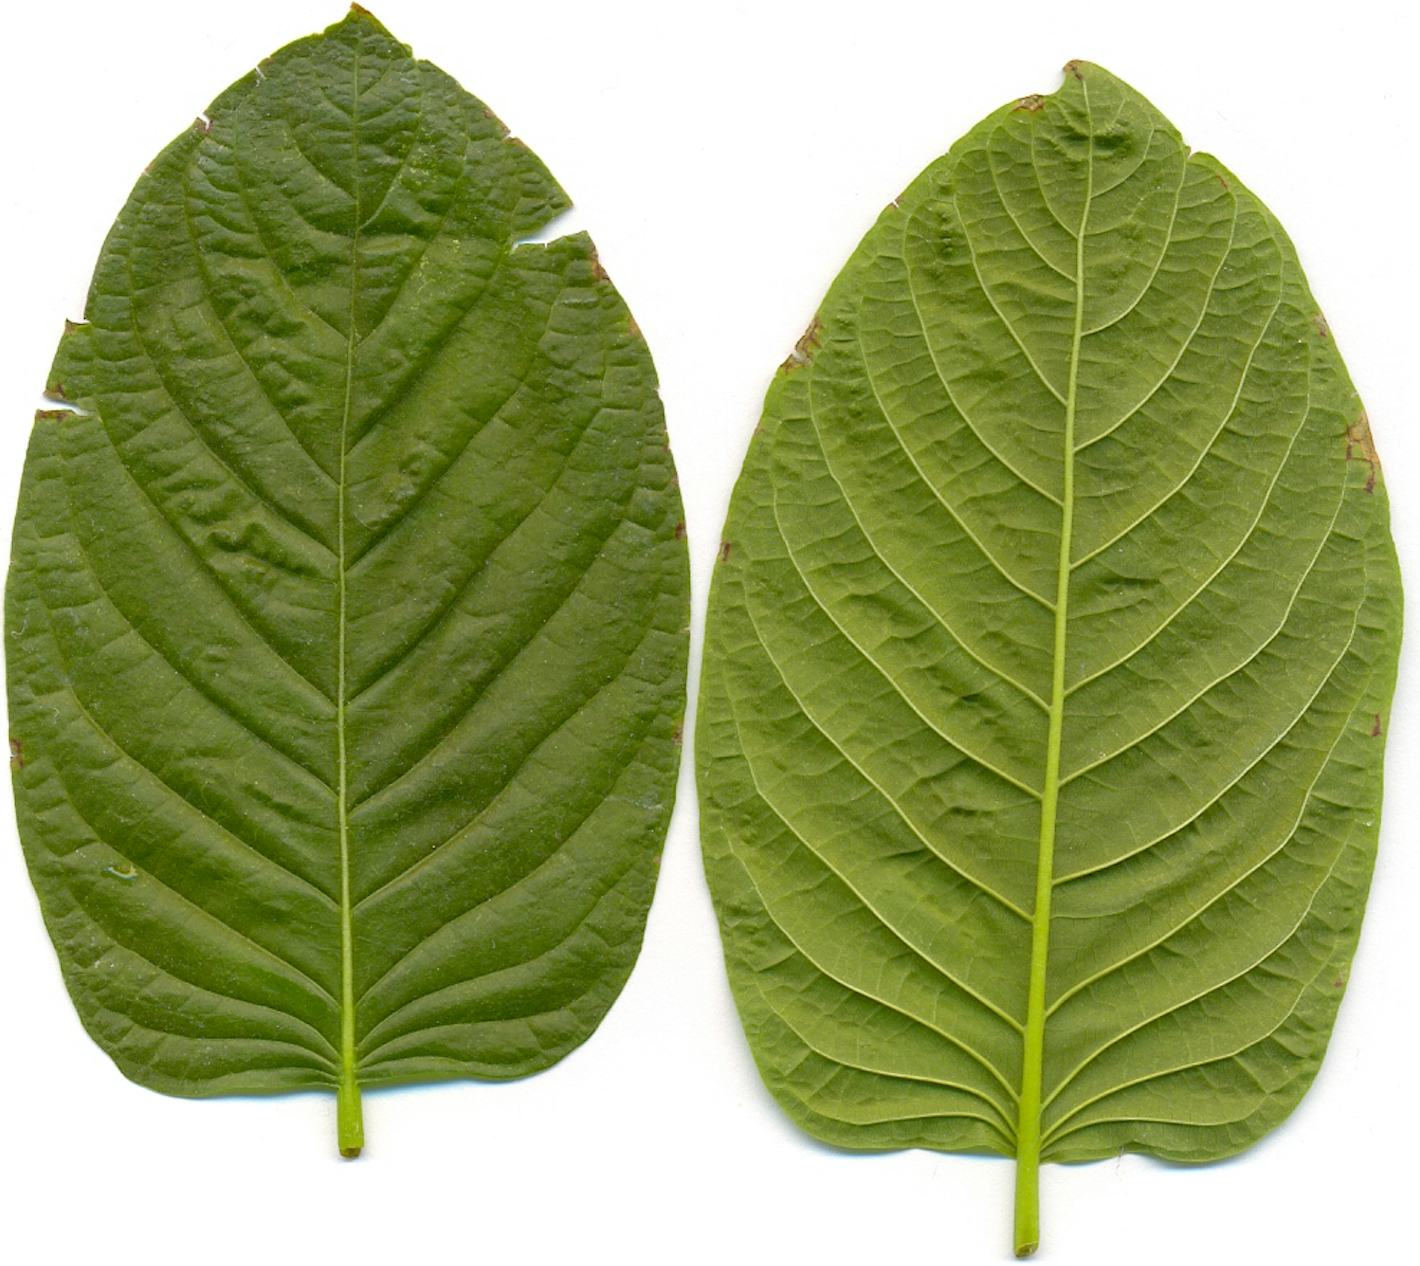 Kratom: Why the FDA Just Warned the Herb is an ‘Opioid’